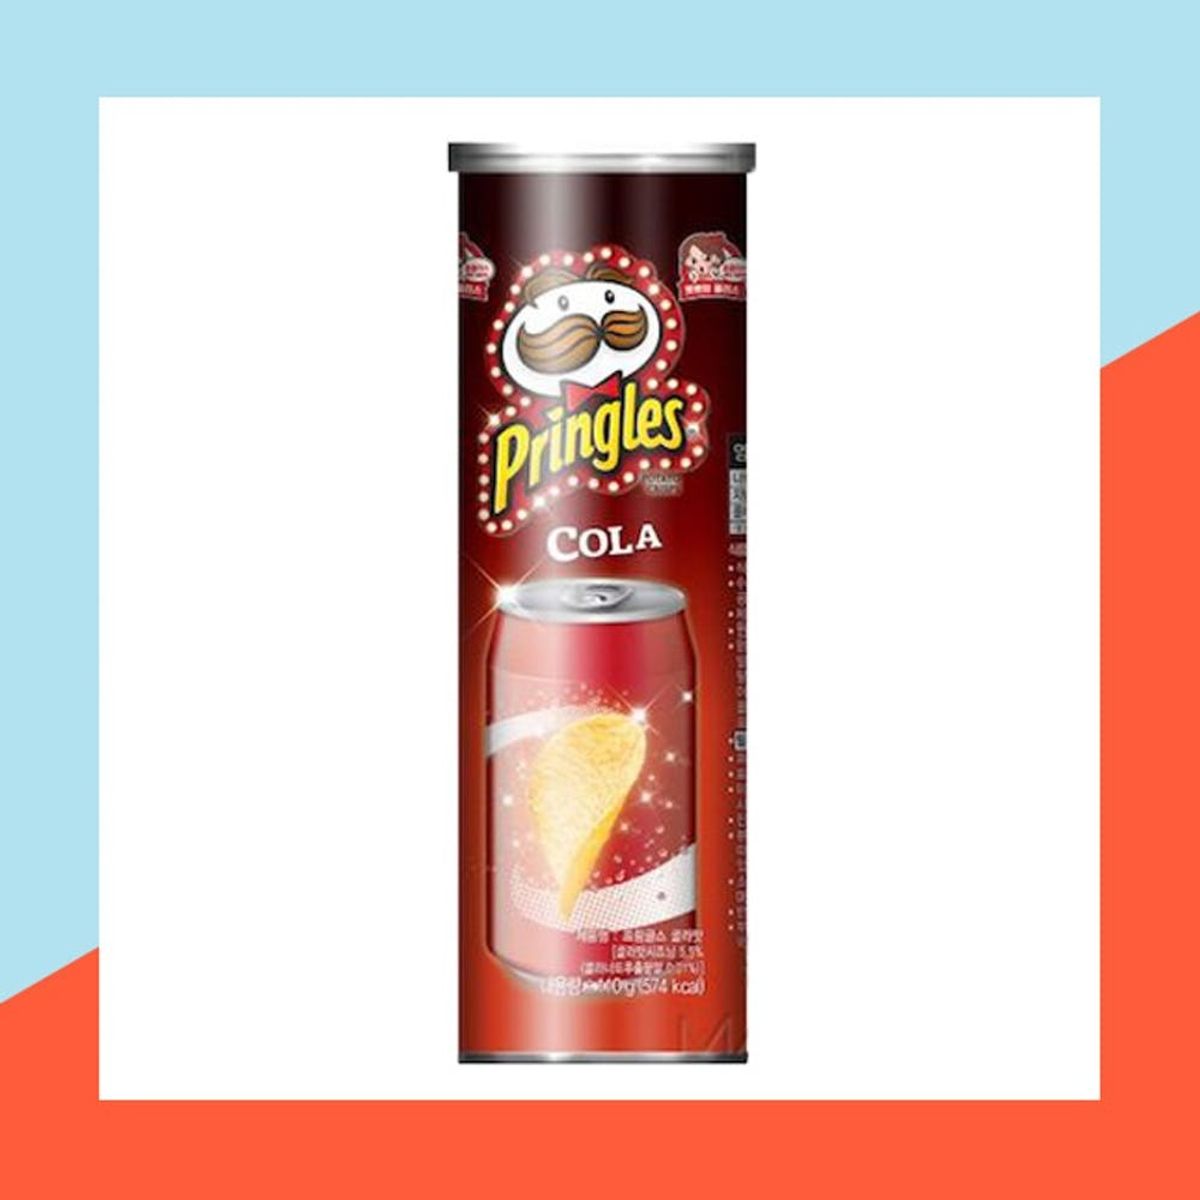 It’s Almost 2018, So Cola-Flavored Pringles Are a Thing